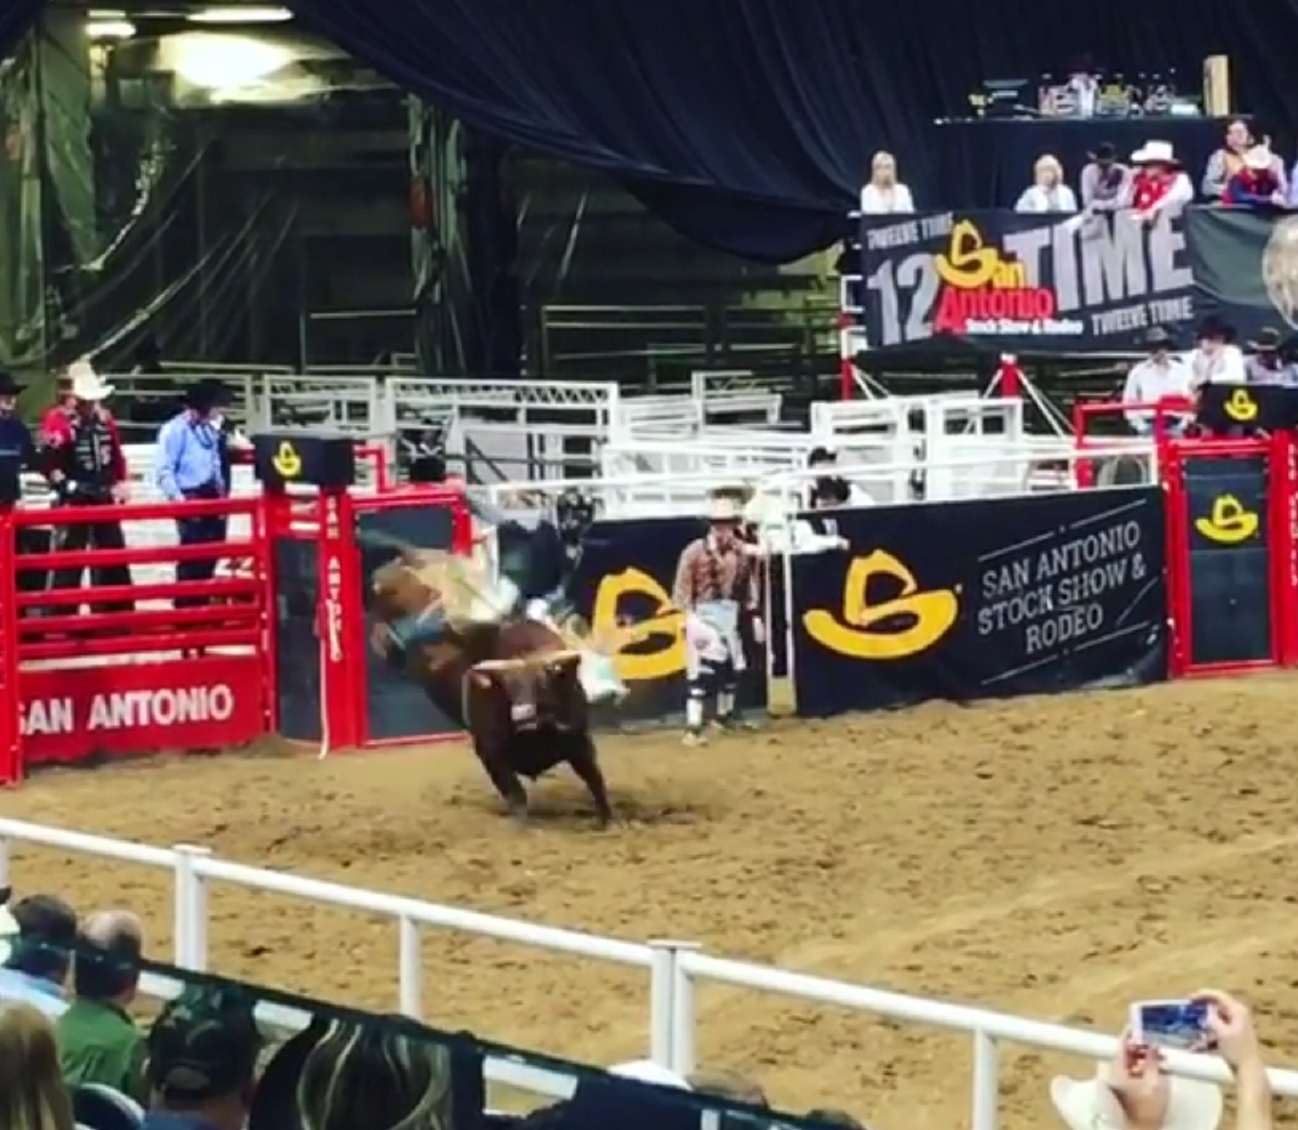 Video shows bull rider go 'down cold' during San Antonio Stock Show & Rodeo